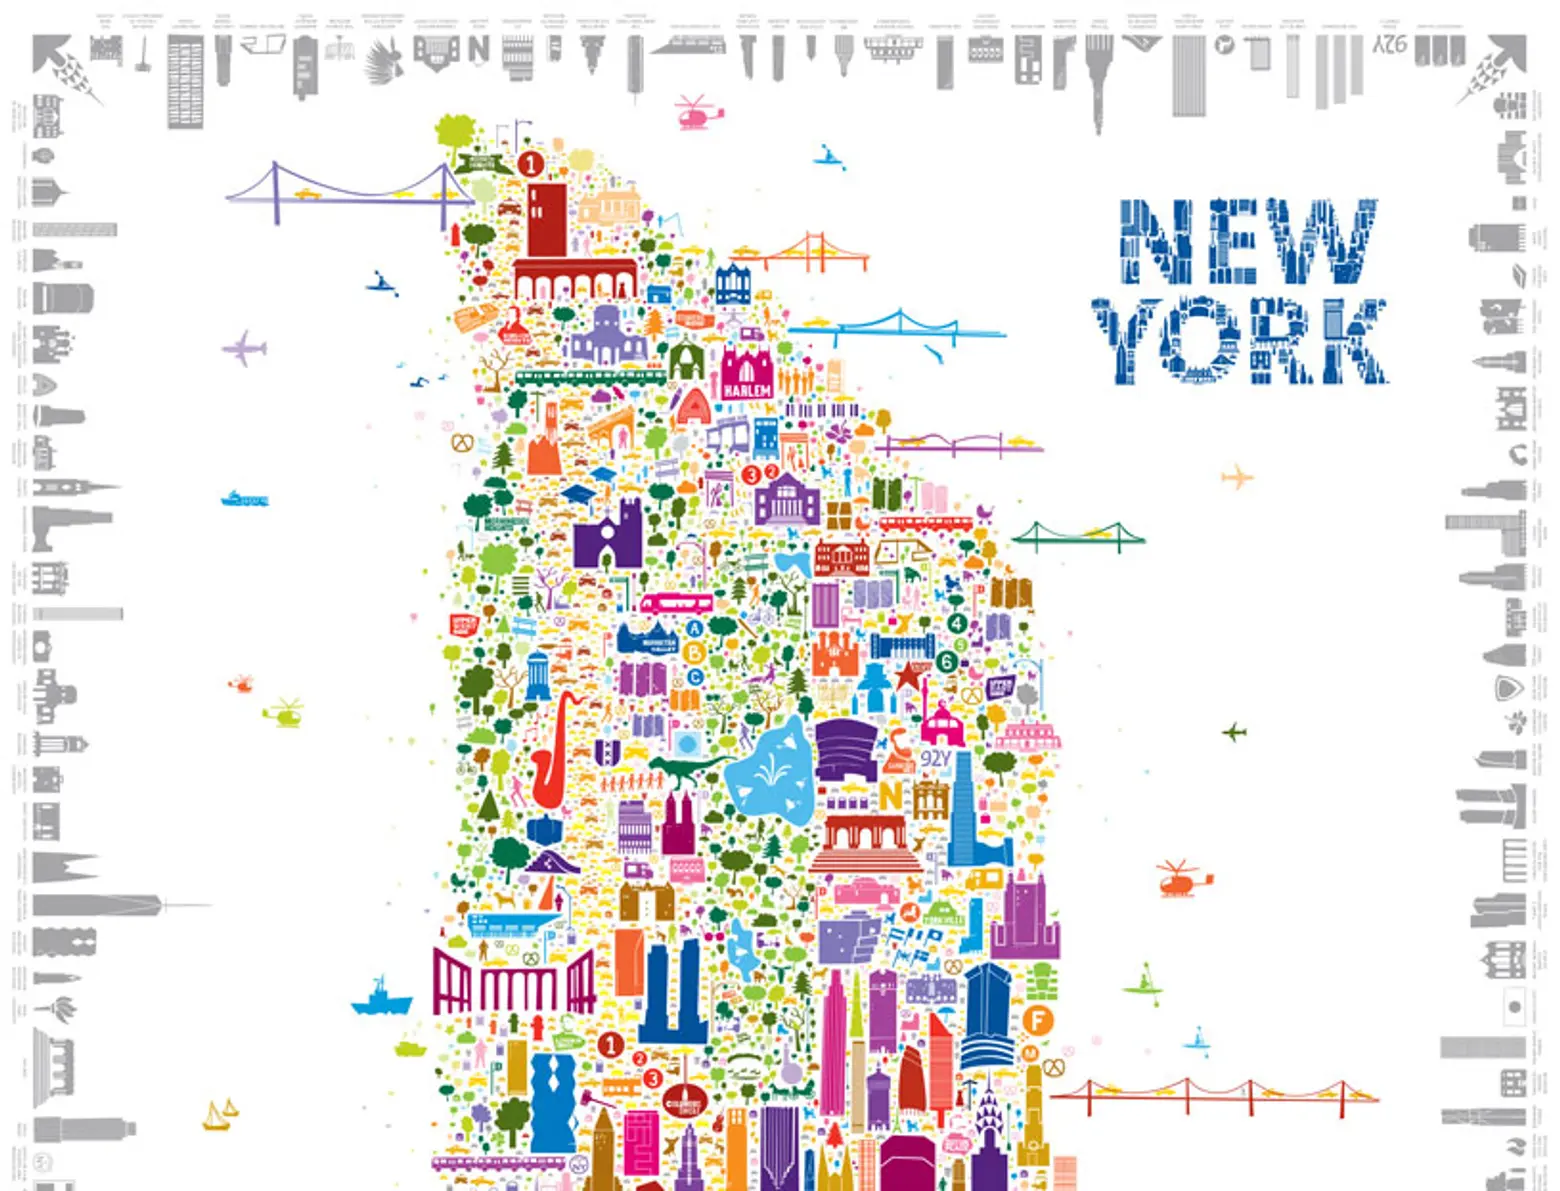 Whimsical Map Colorfully Details 400+ New York Icons